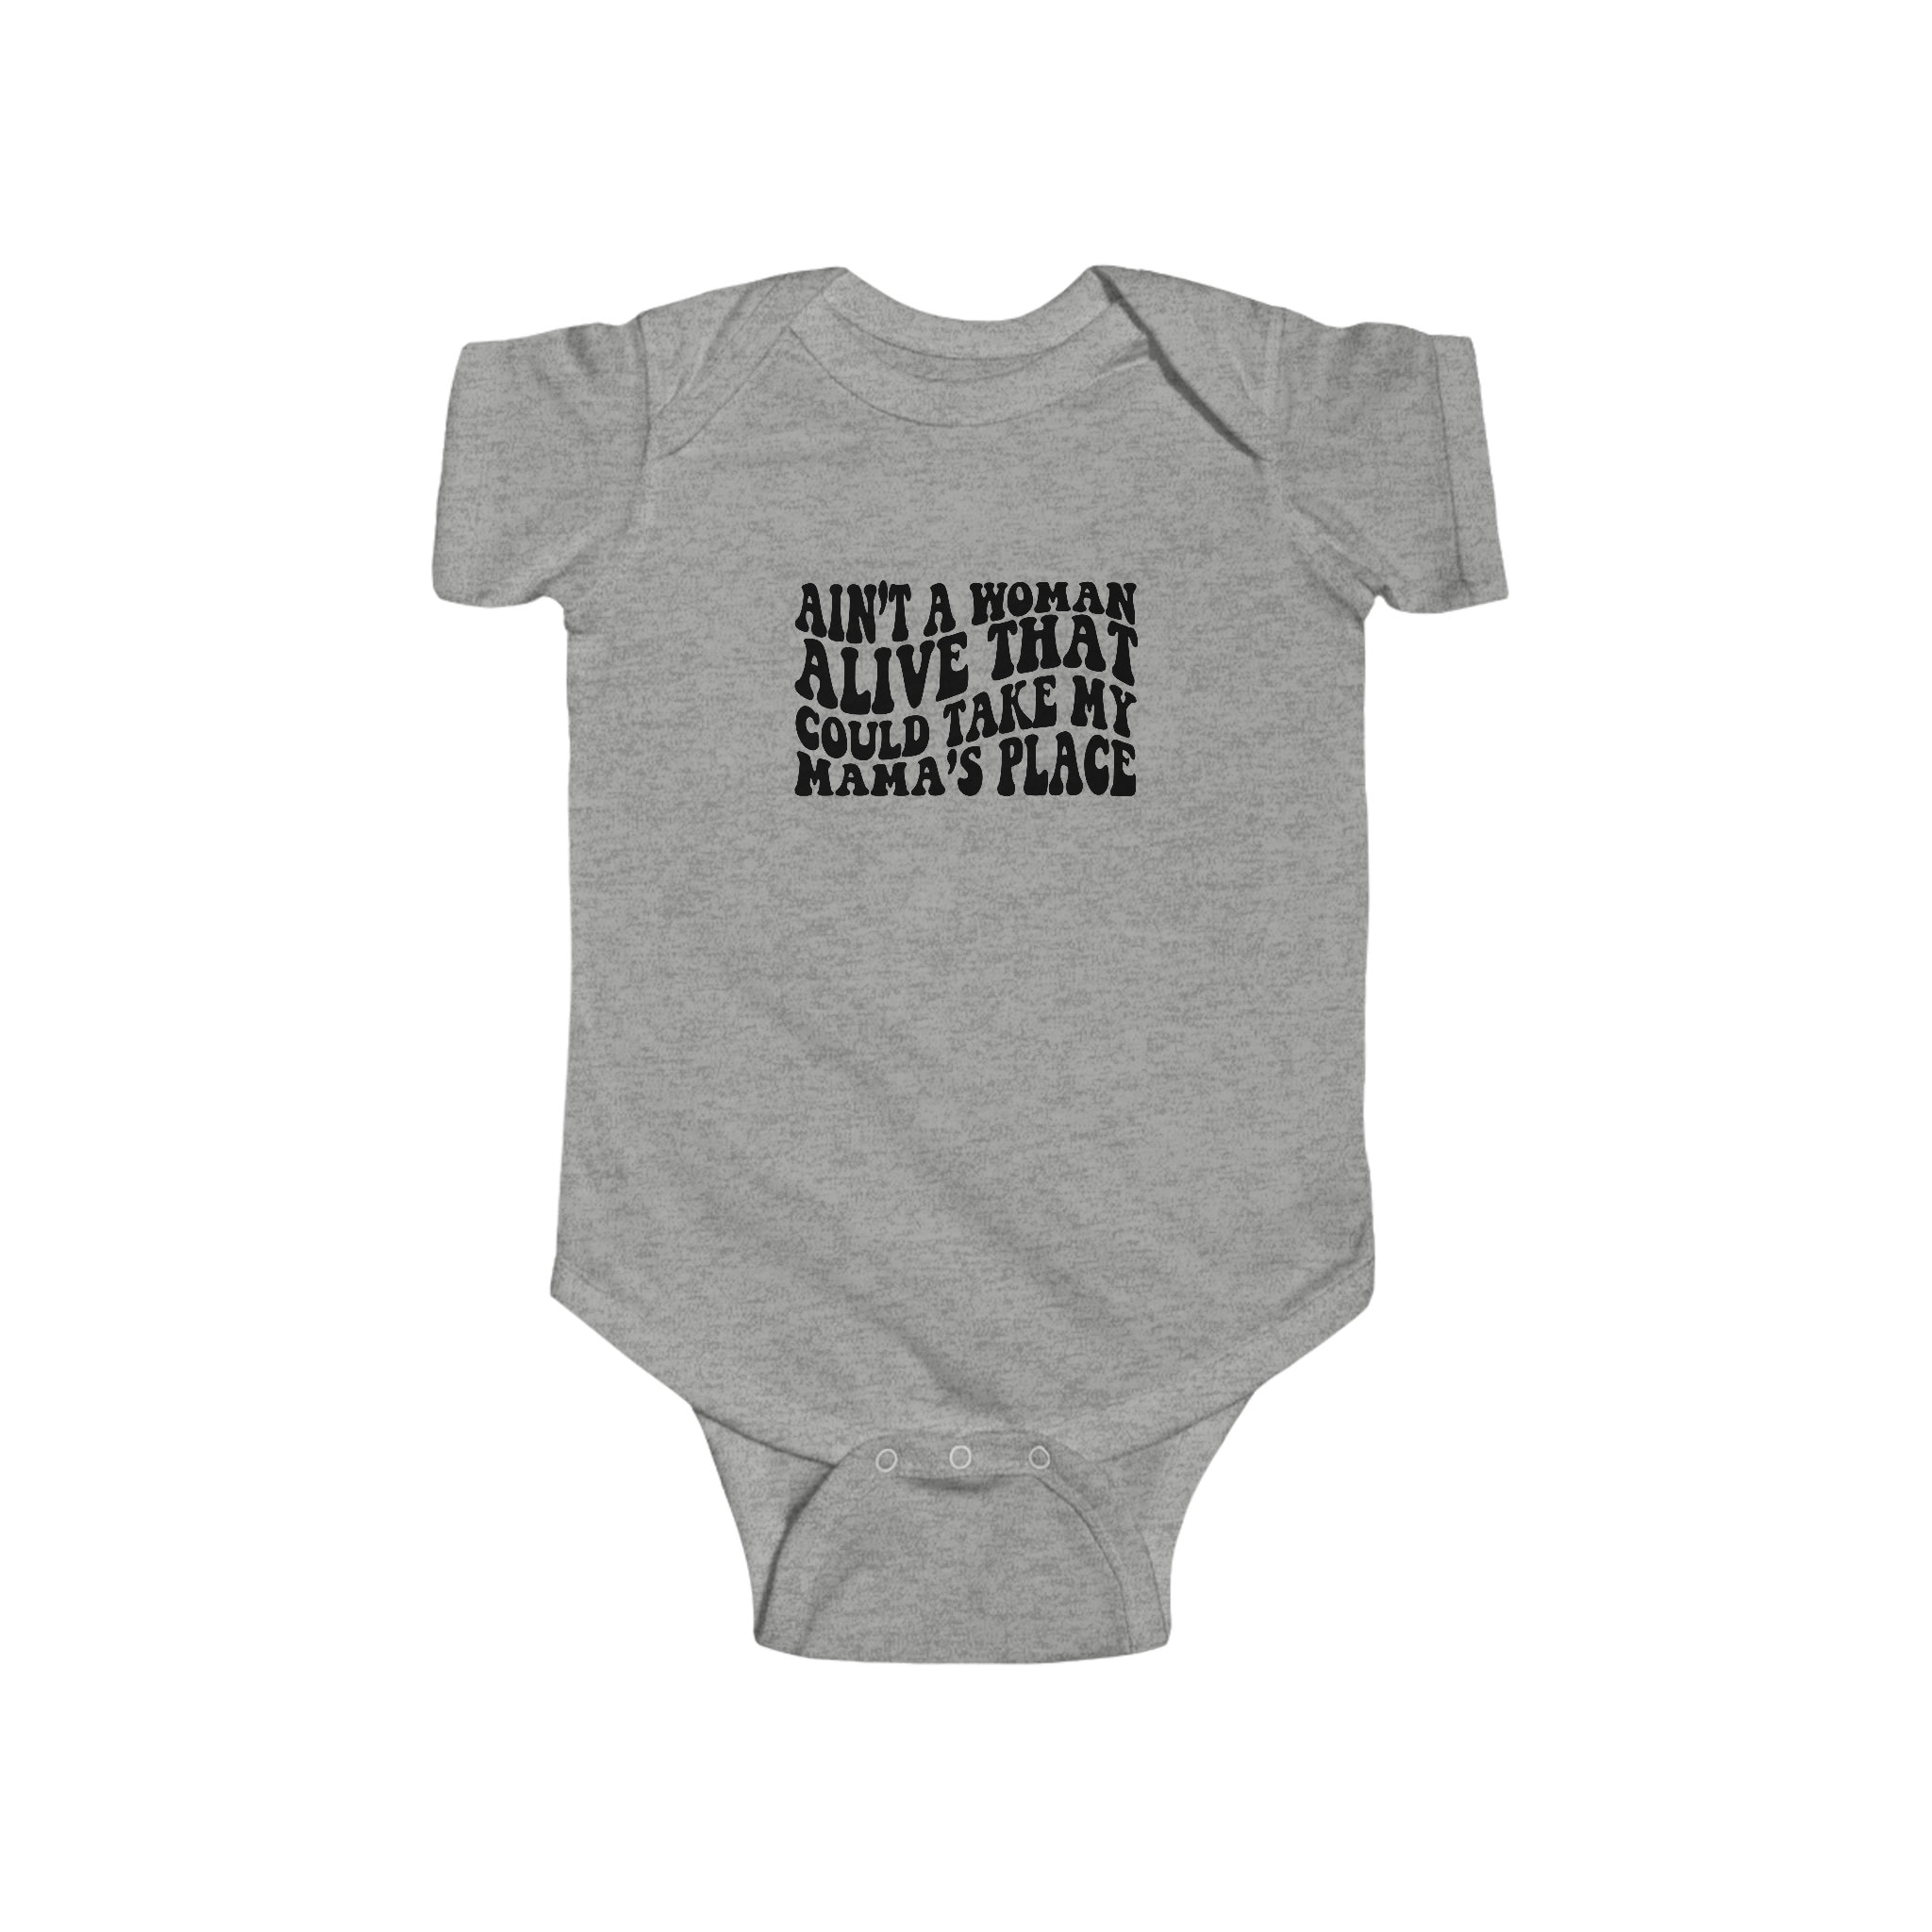 TUPAC Baby Onesie, Ain't A Woman Alive